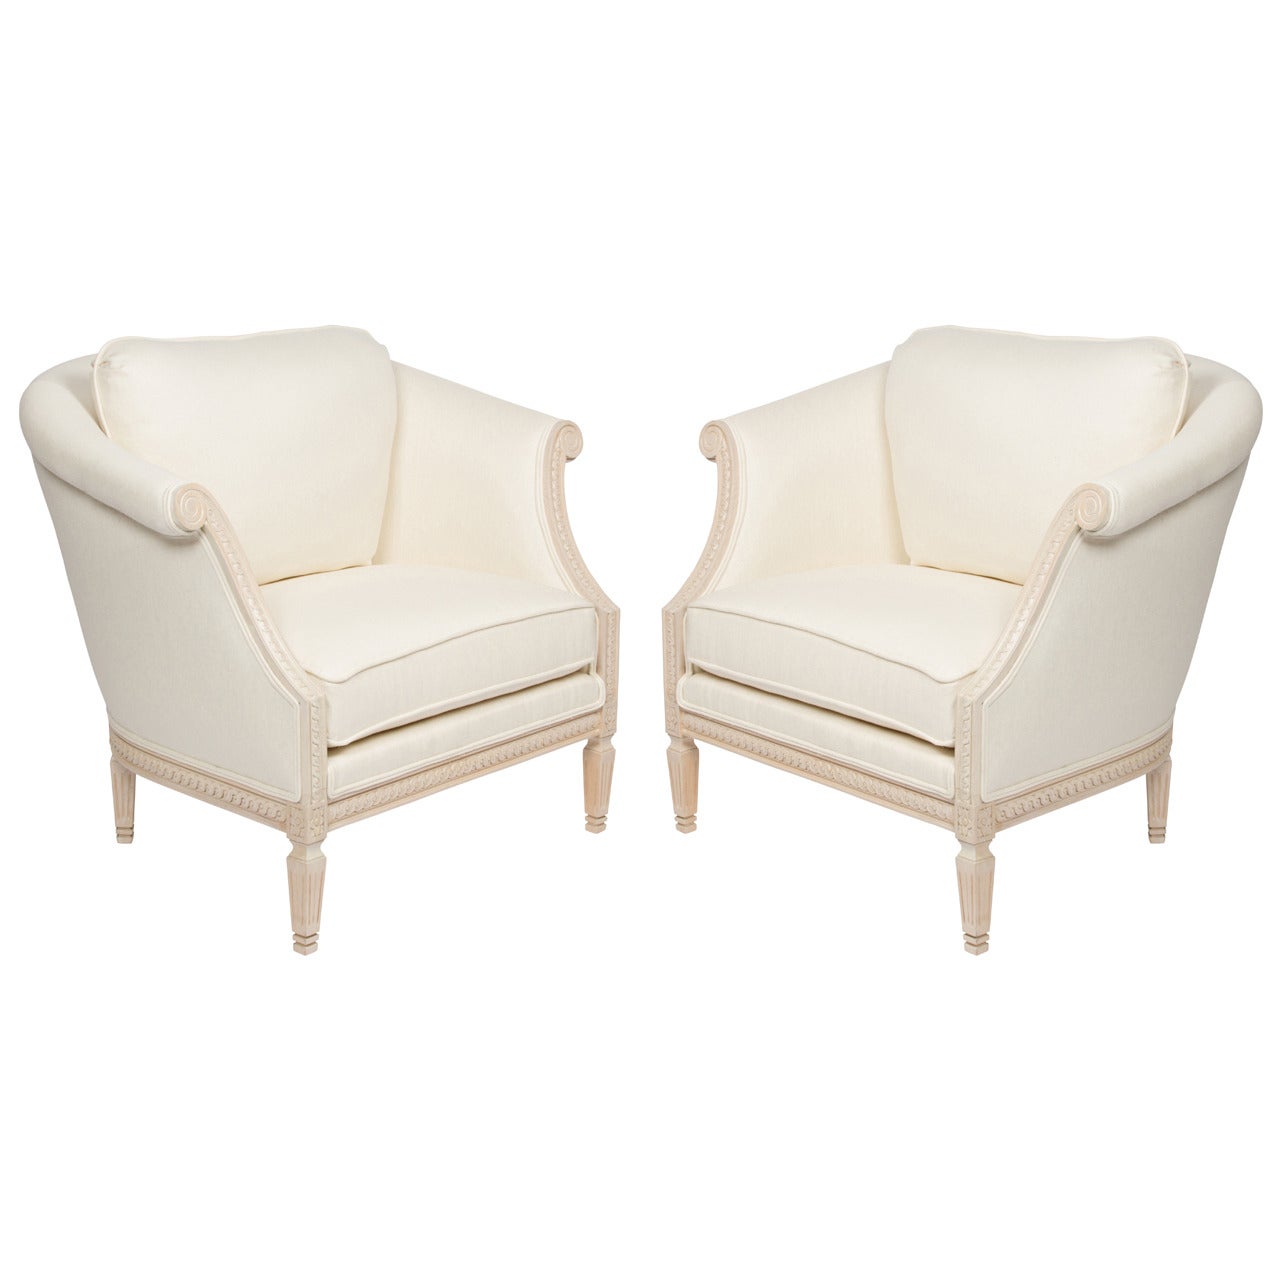 Pair of French Regency Bergère Chairs